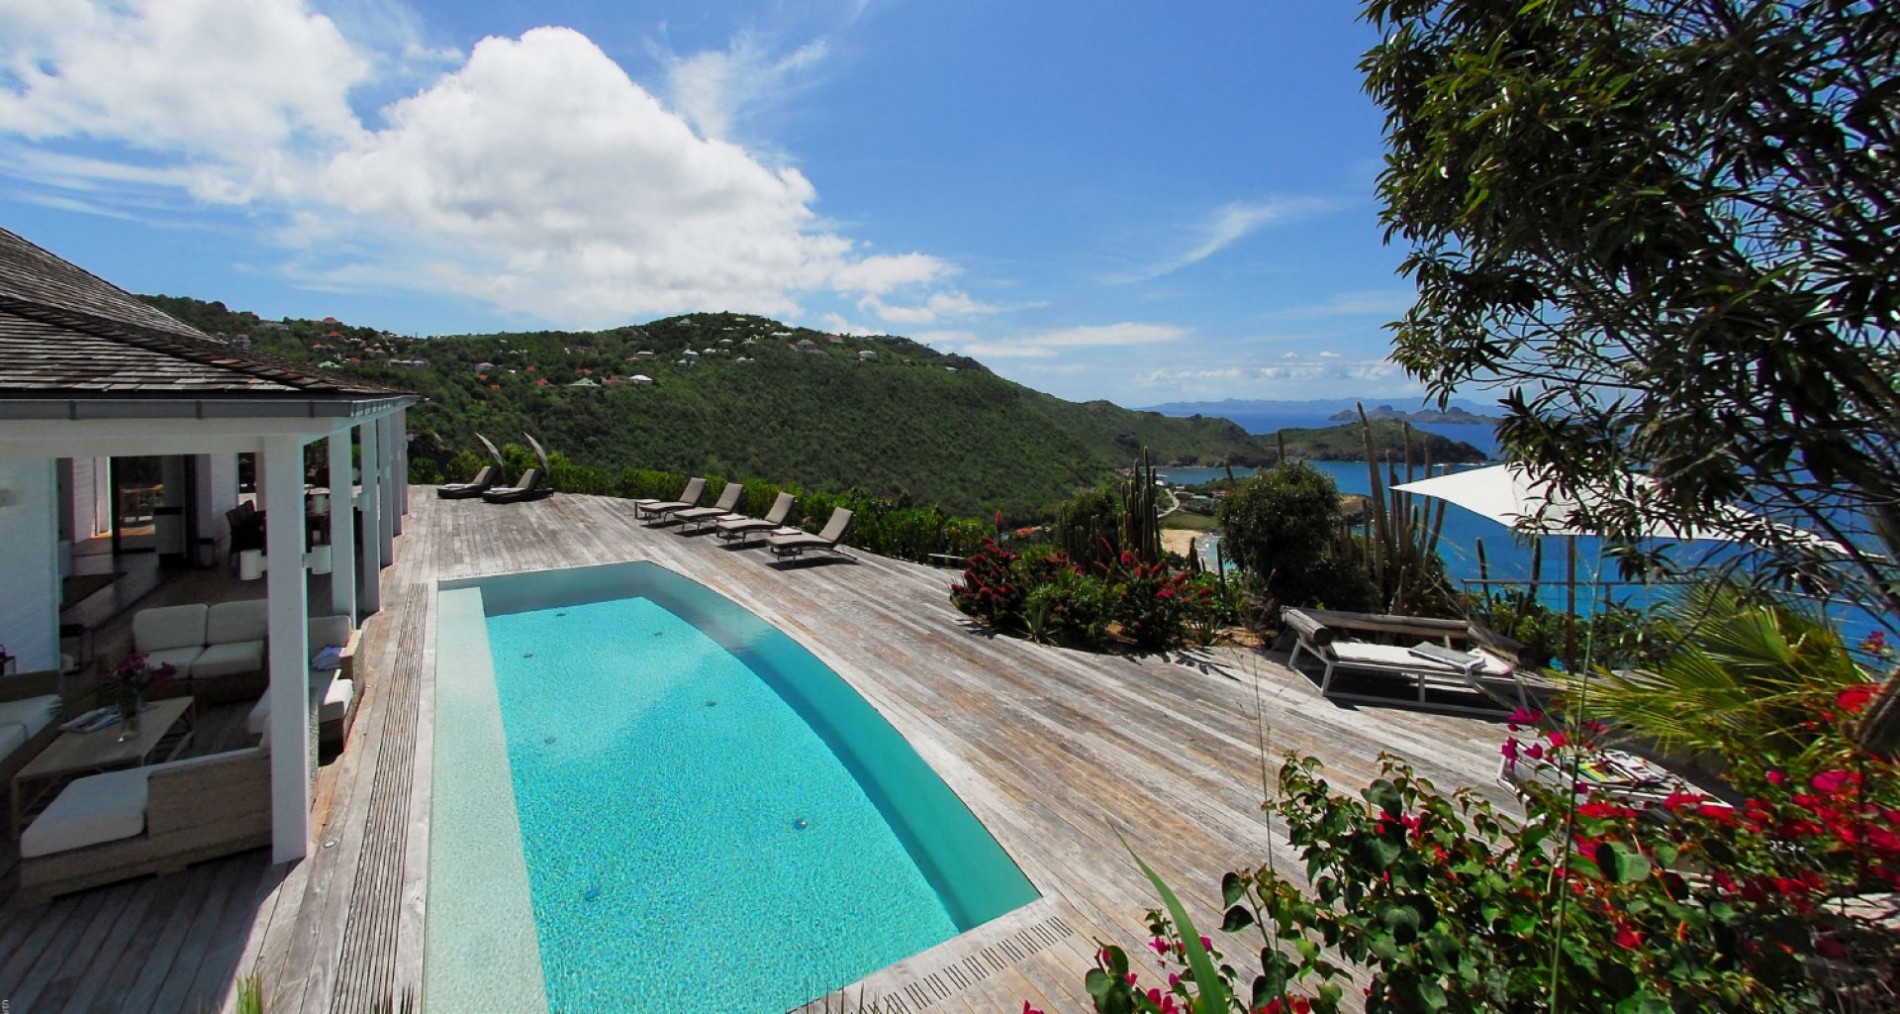 Private Dining, Private Butler & Bartender Services in Saint Barts